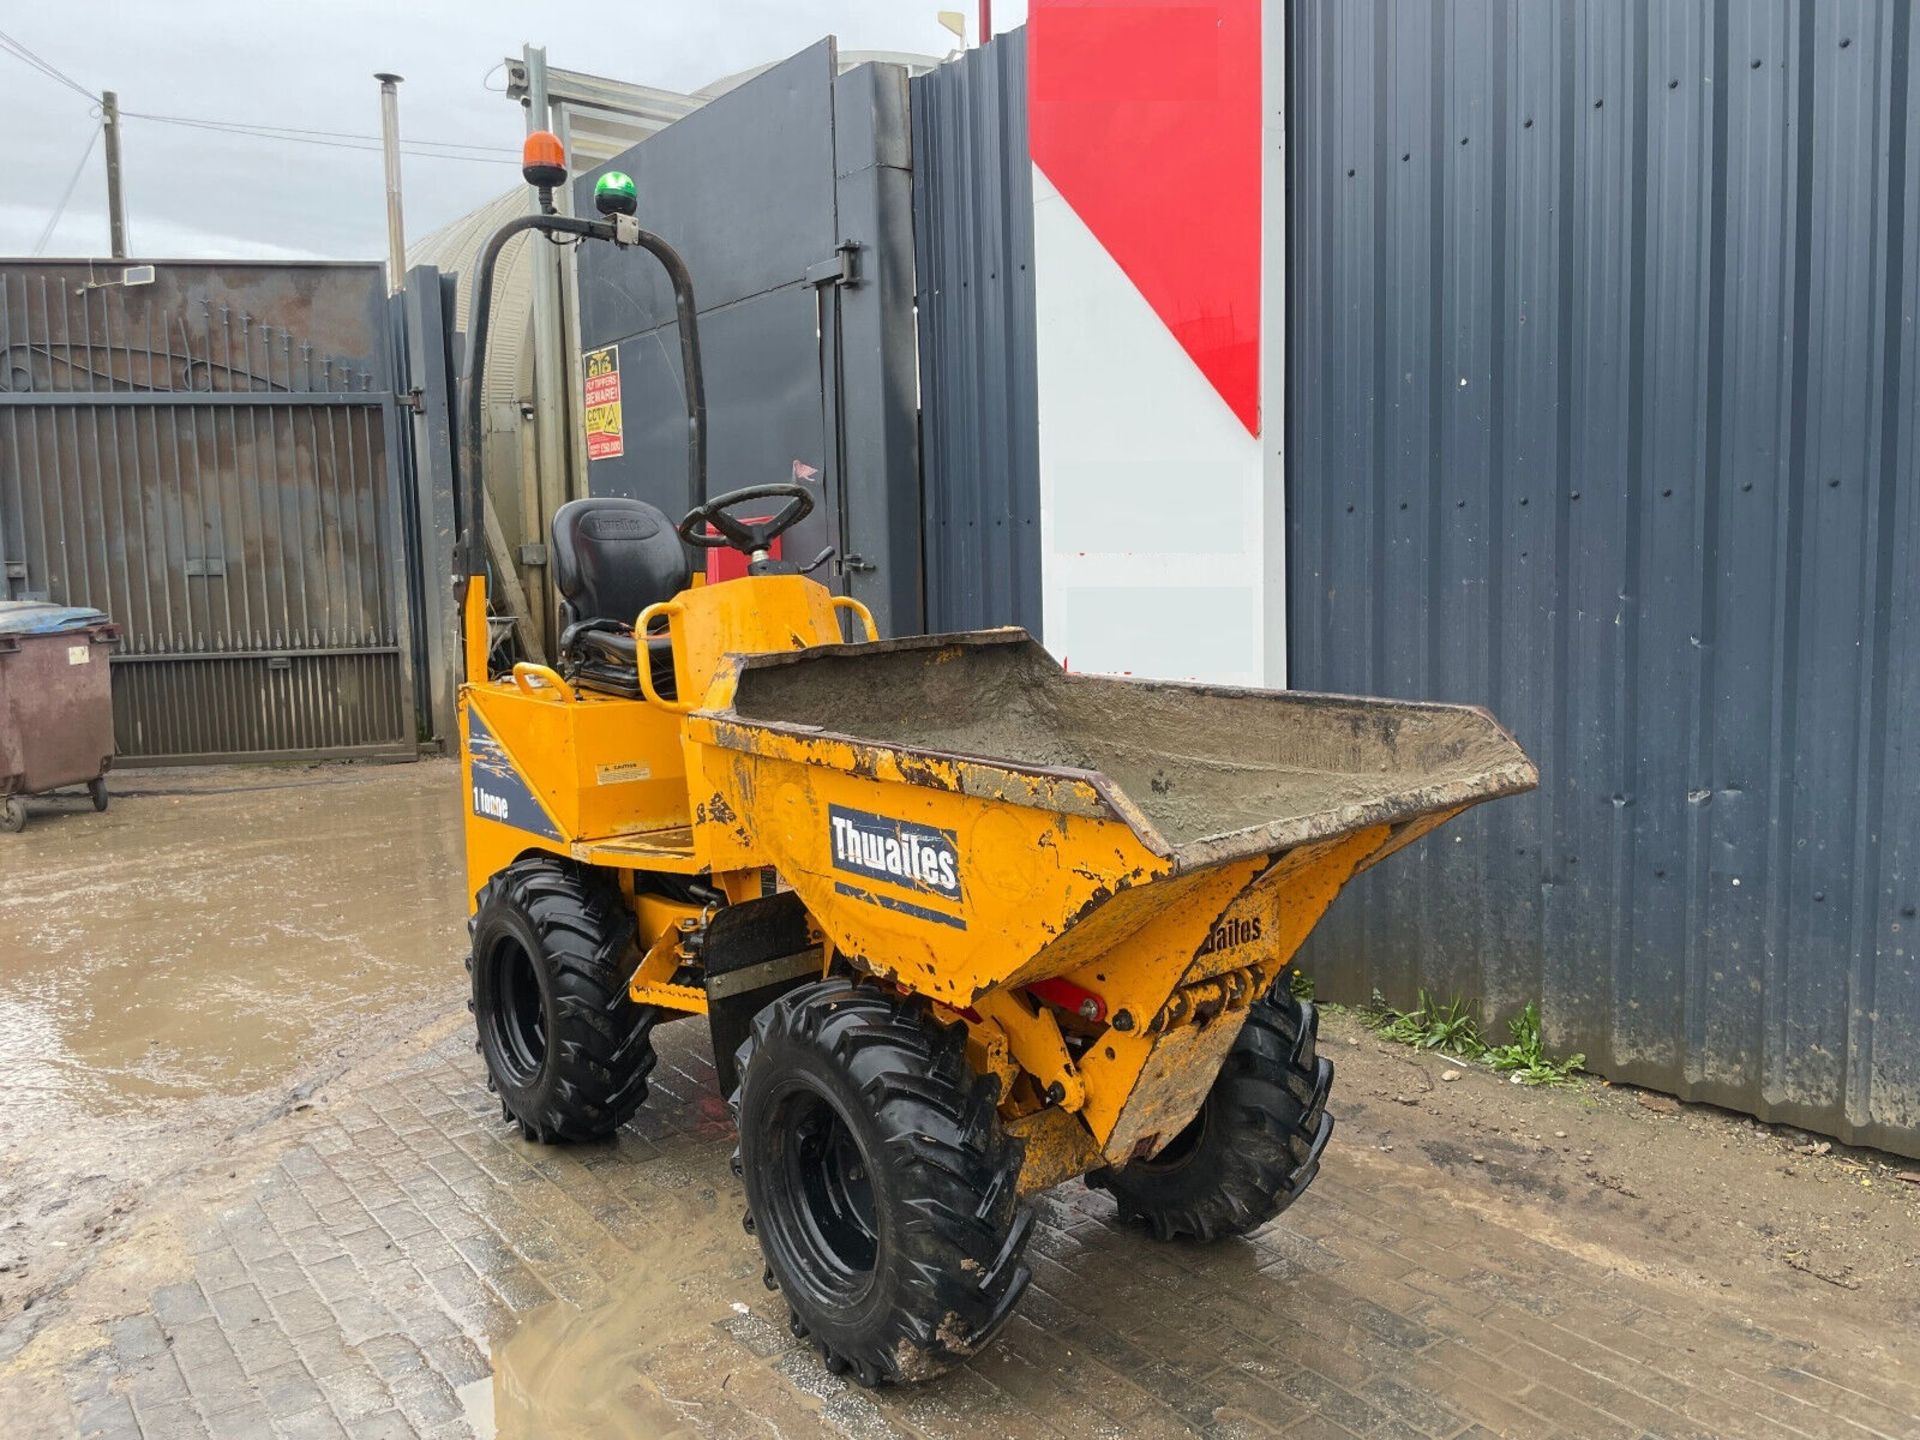 2016 THWAITES 1 TONNE DUMPER: ROBUST PERFORMANCE AND LOW HOURS - Image 4 of 8